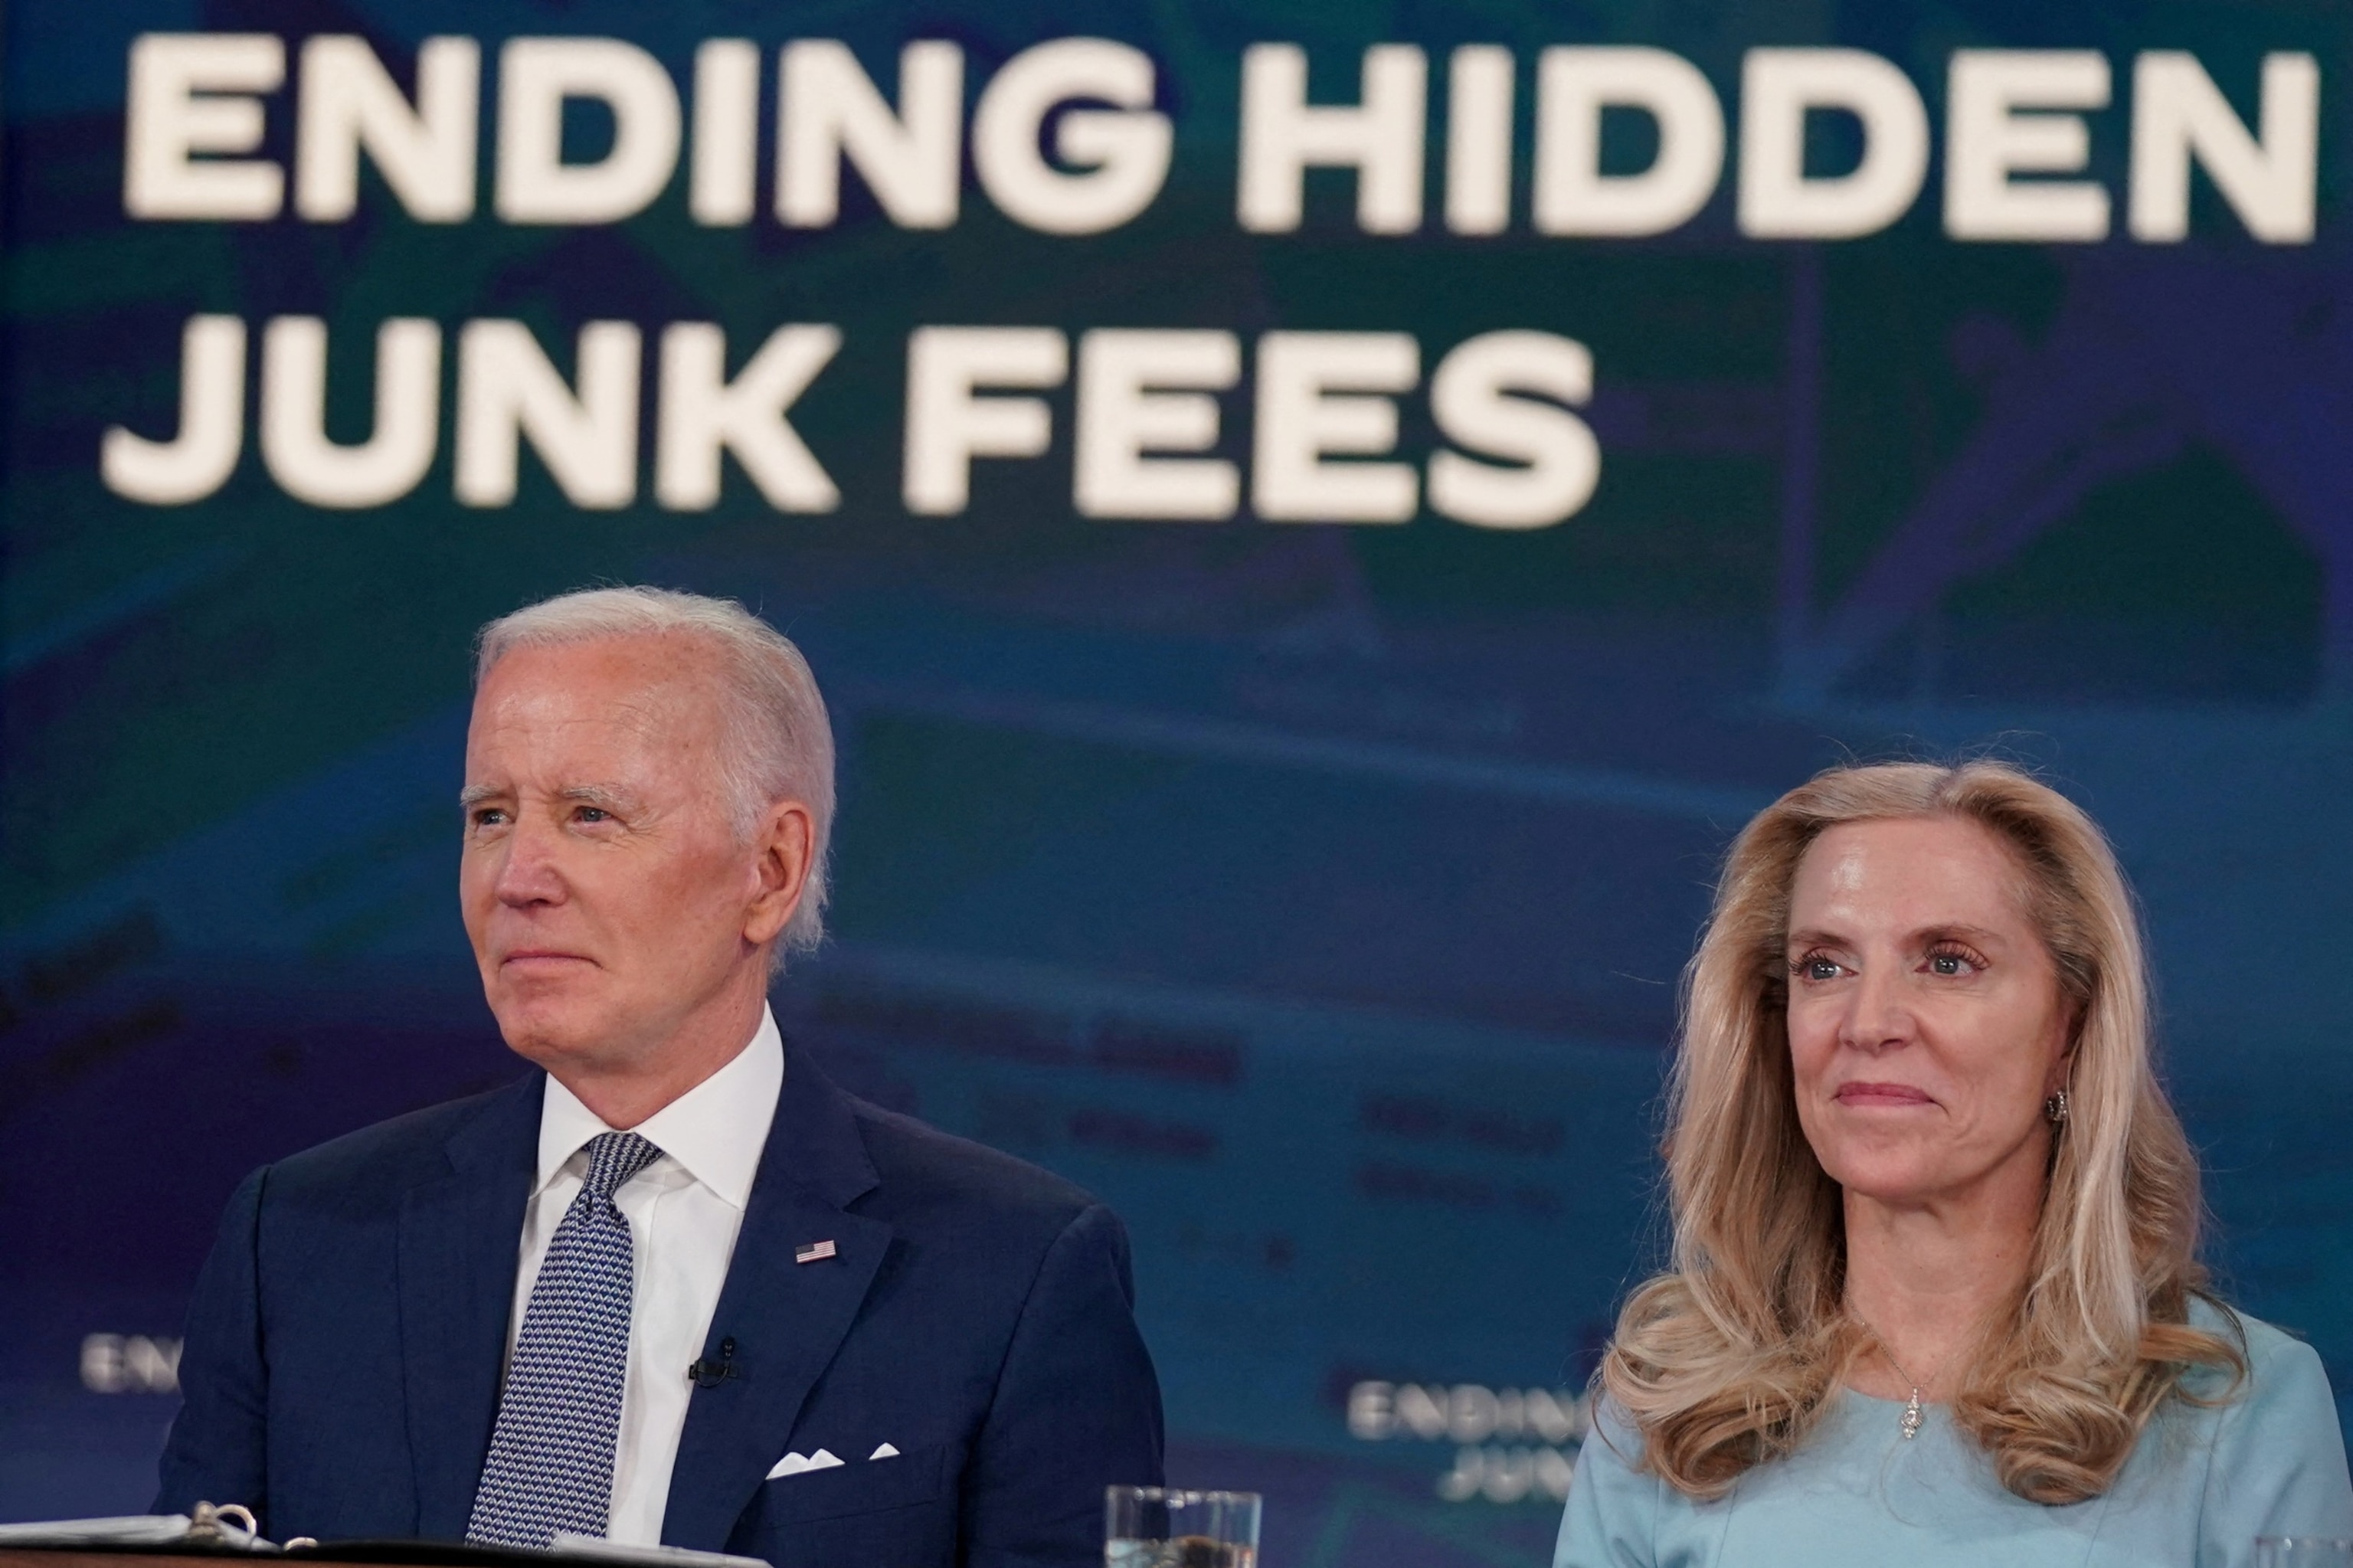 PHOTO: In this file photo, President Joe Biden and Lael Brainard, assistant to the president and director of the National Economic Council, participate in a discussion near the White House, in Washington, D.C., June 15, 2023.